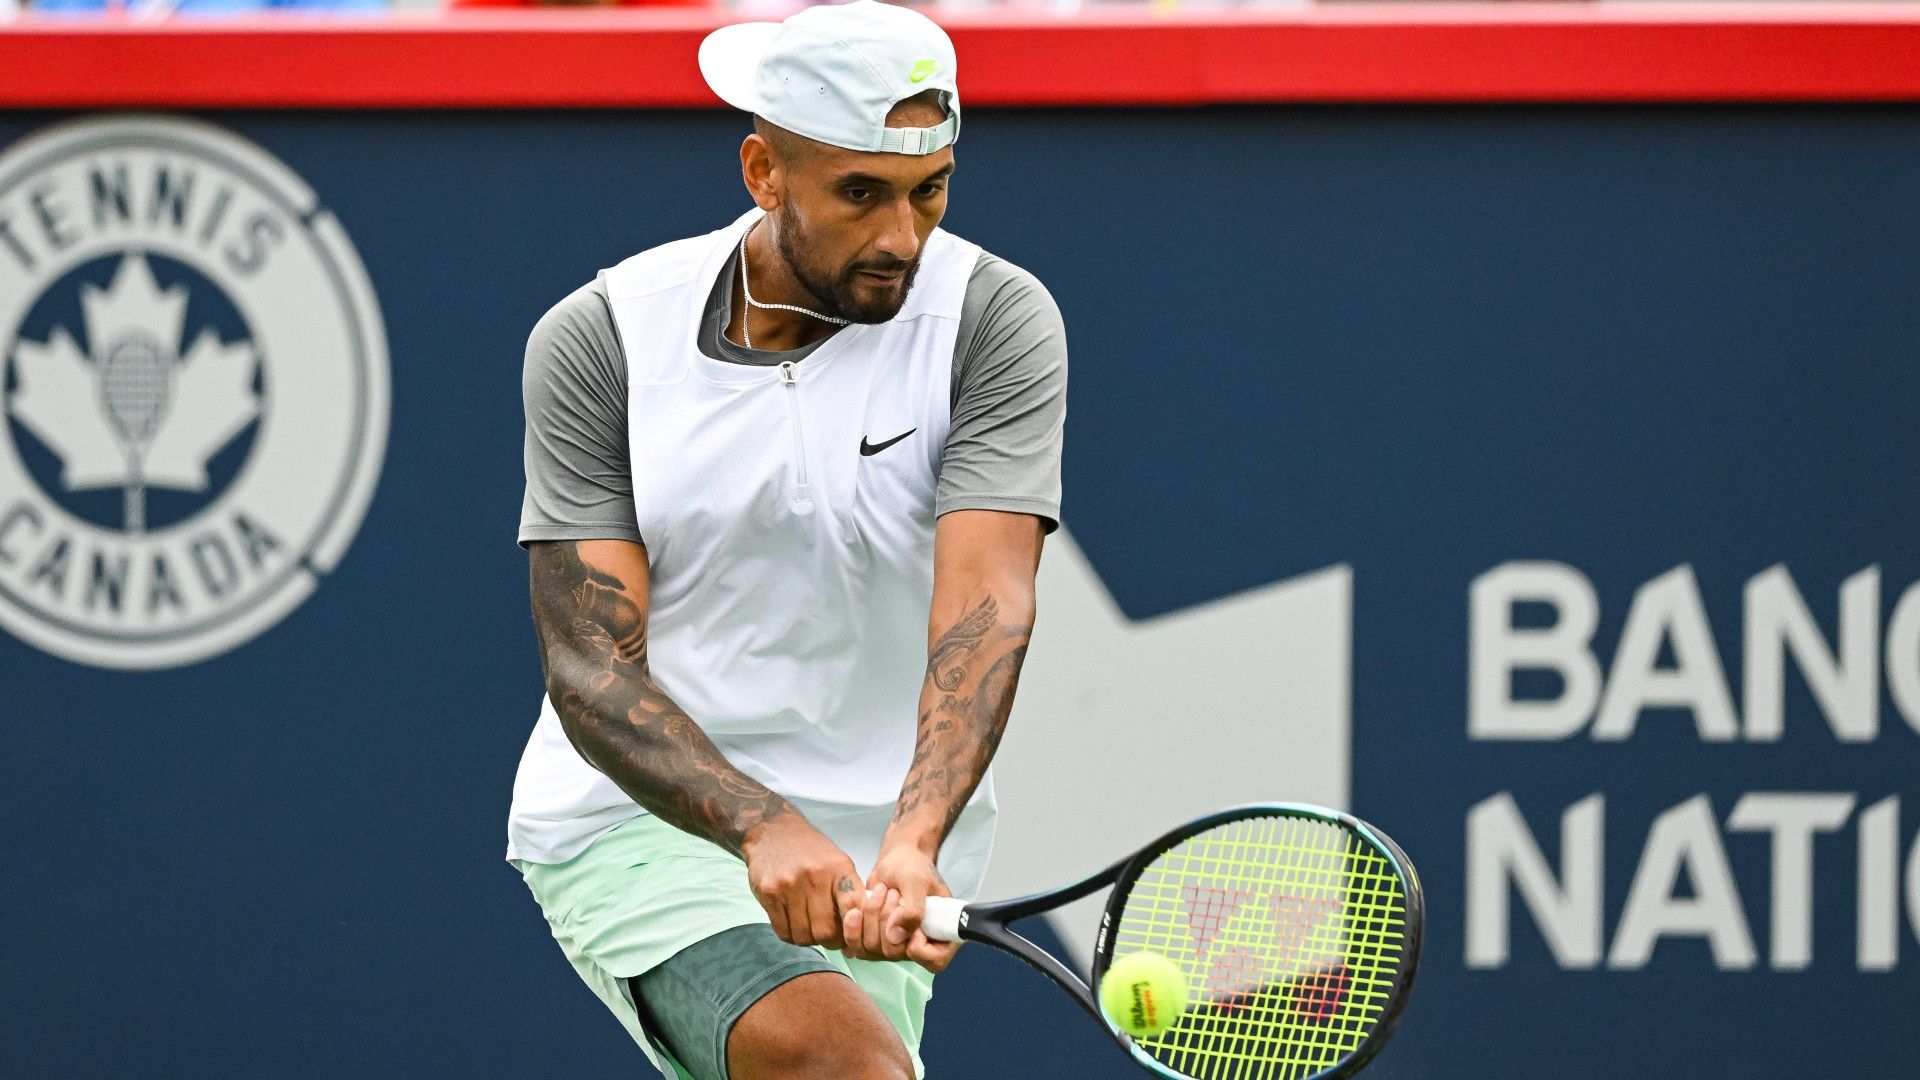 Kyrgios, feeling drained, would embrace an early departure from the US Open at Flushing Meadows